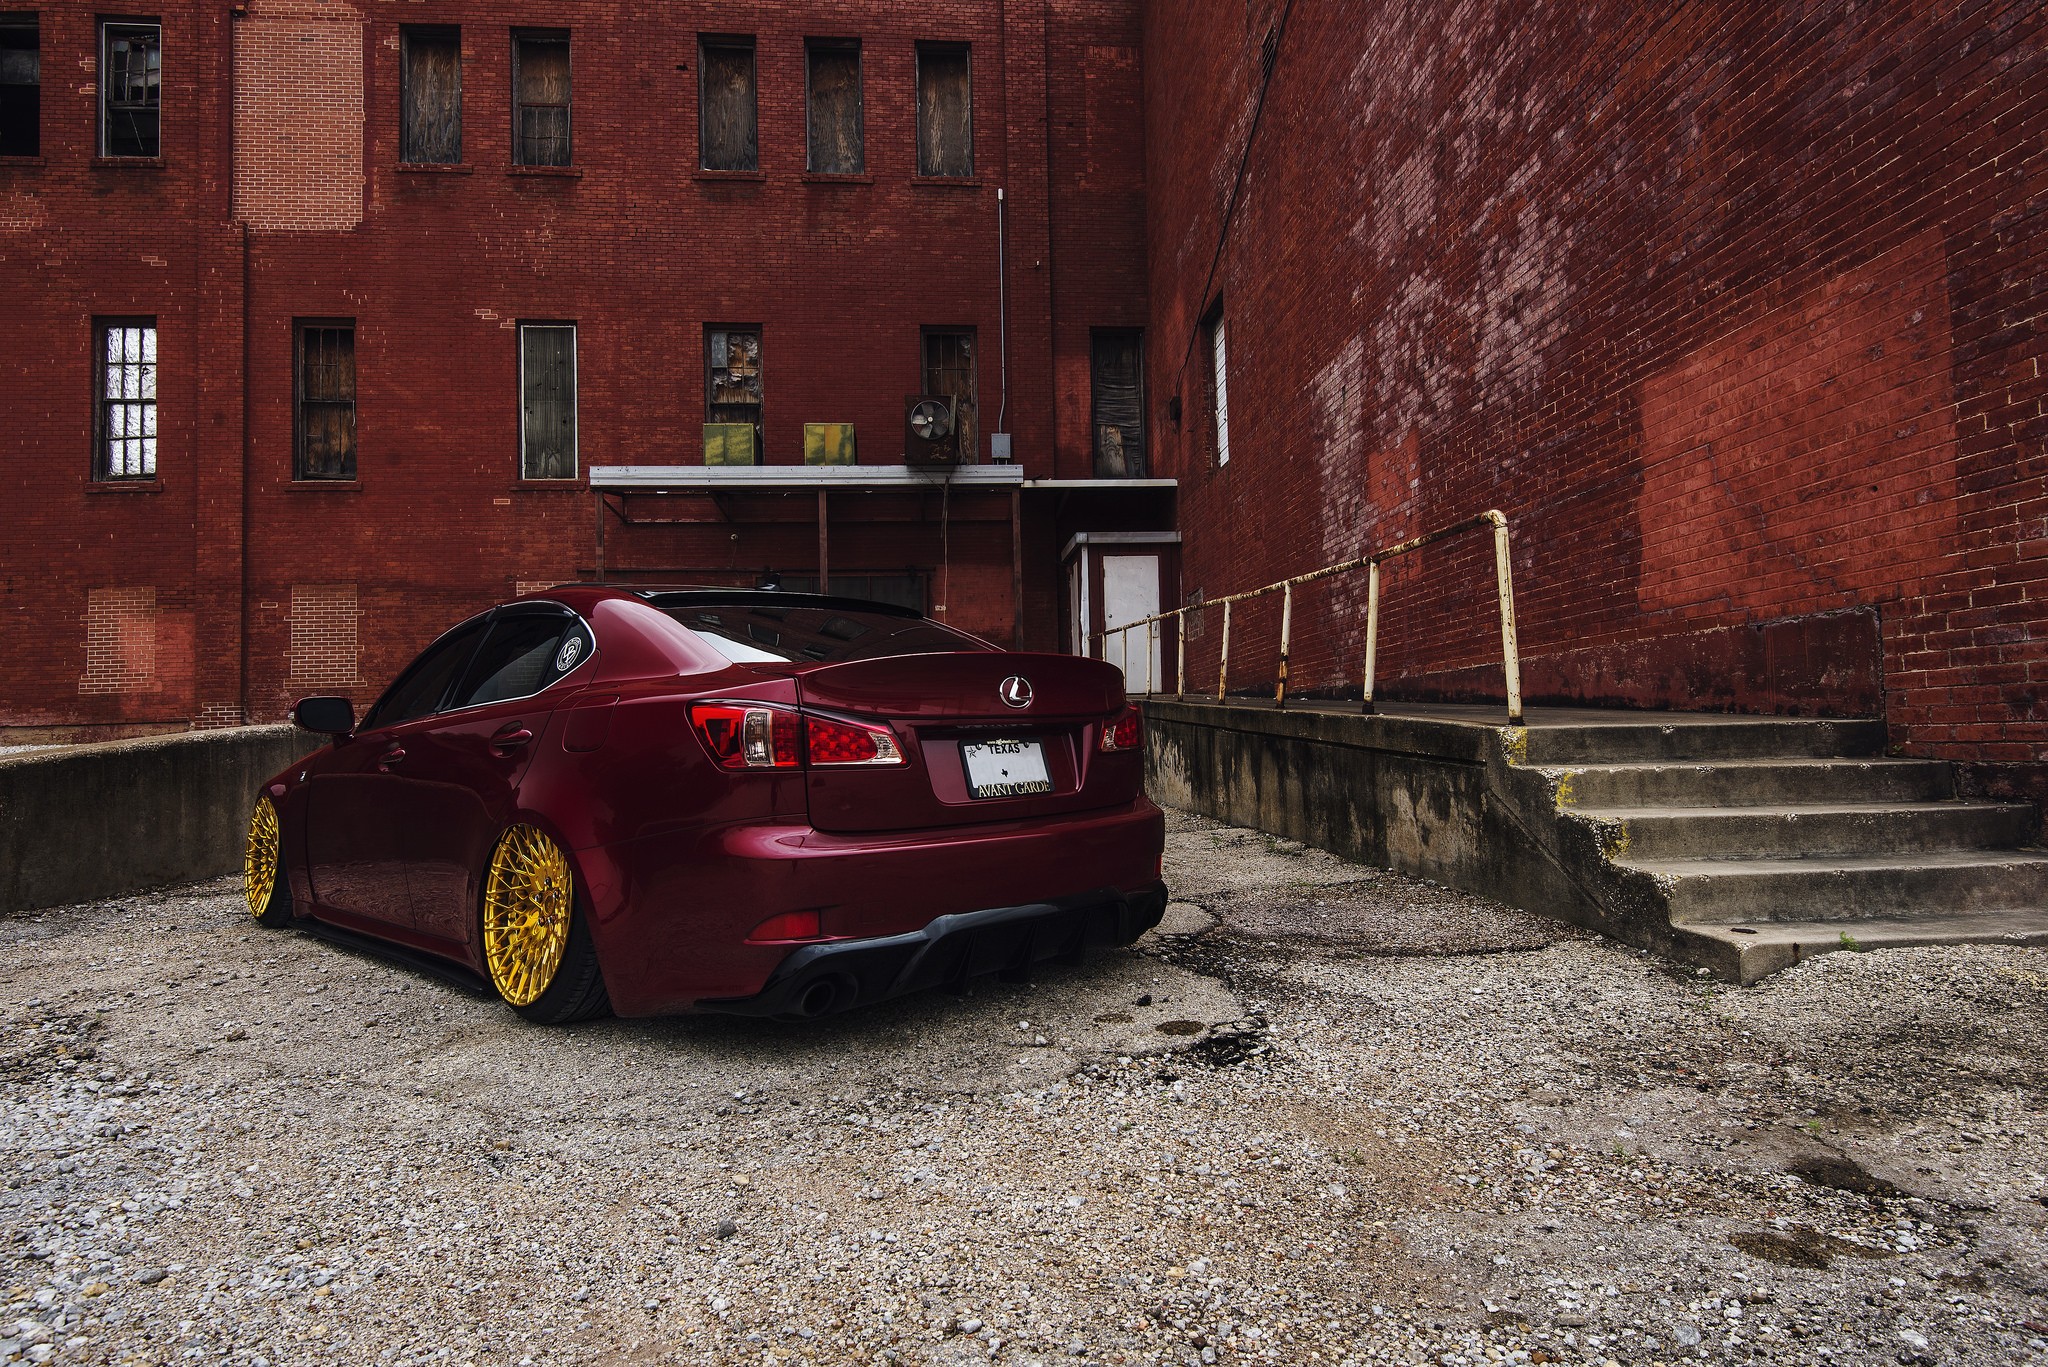 Lexus IS F Stance Tuning Lowered Building JDM Colored Wheels Negative Camber Stanced 2048x1367